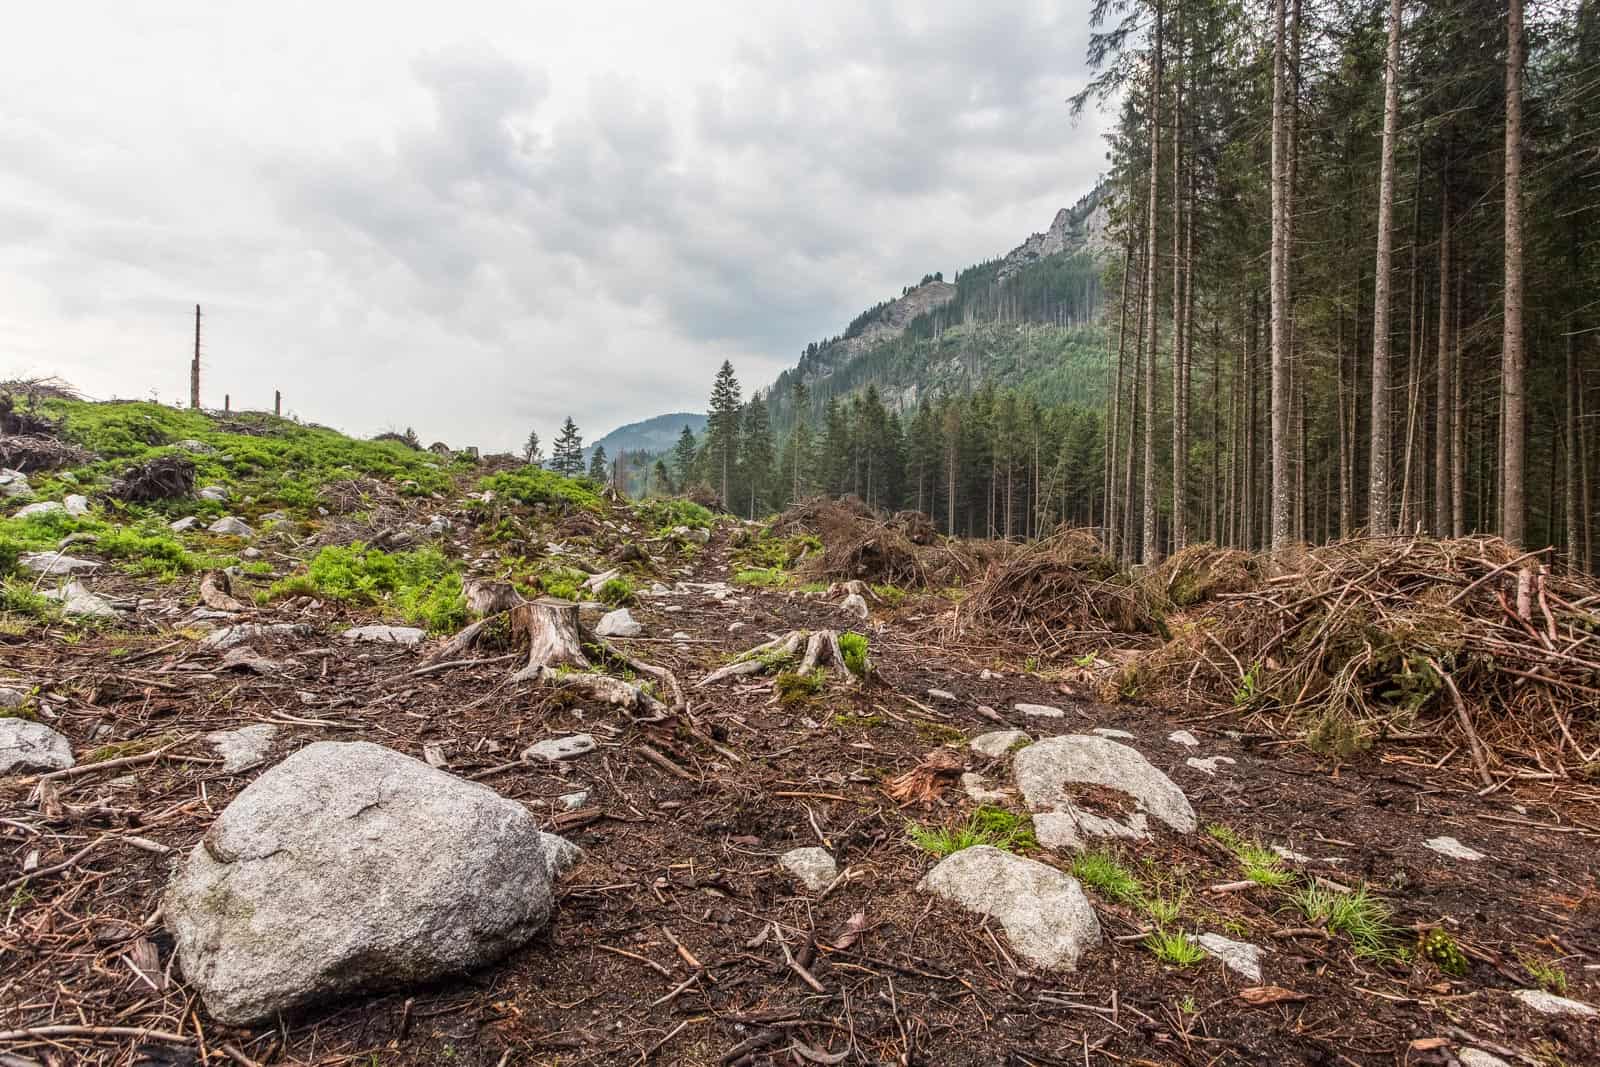 Logging in Slovakian protected areas-22730.jpg - European Wilderness Society  - CC NonCommercial-NoDerivates 4.0 International